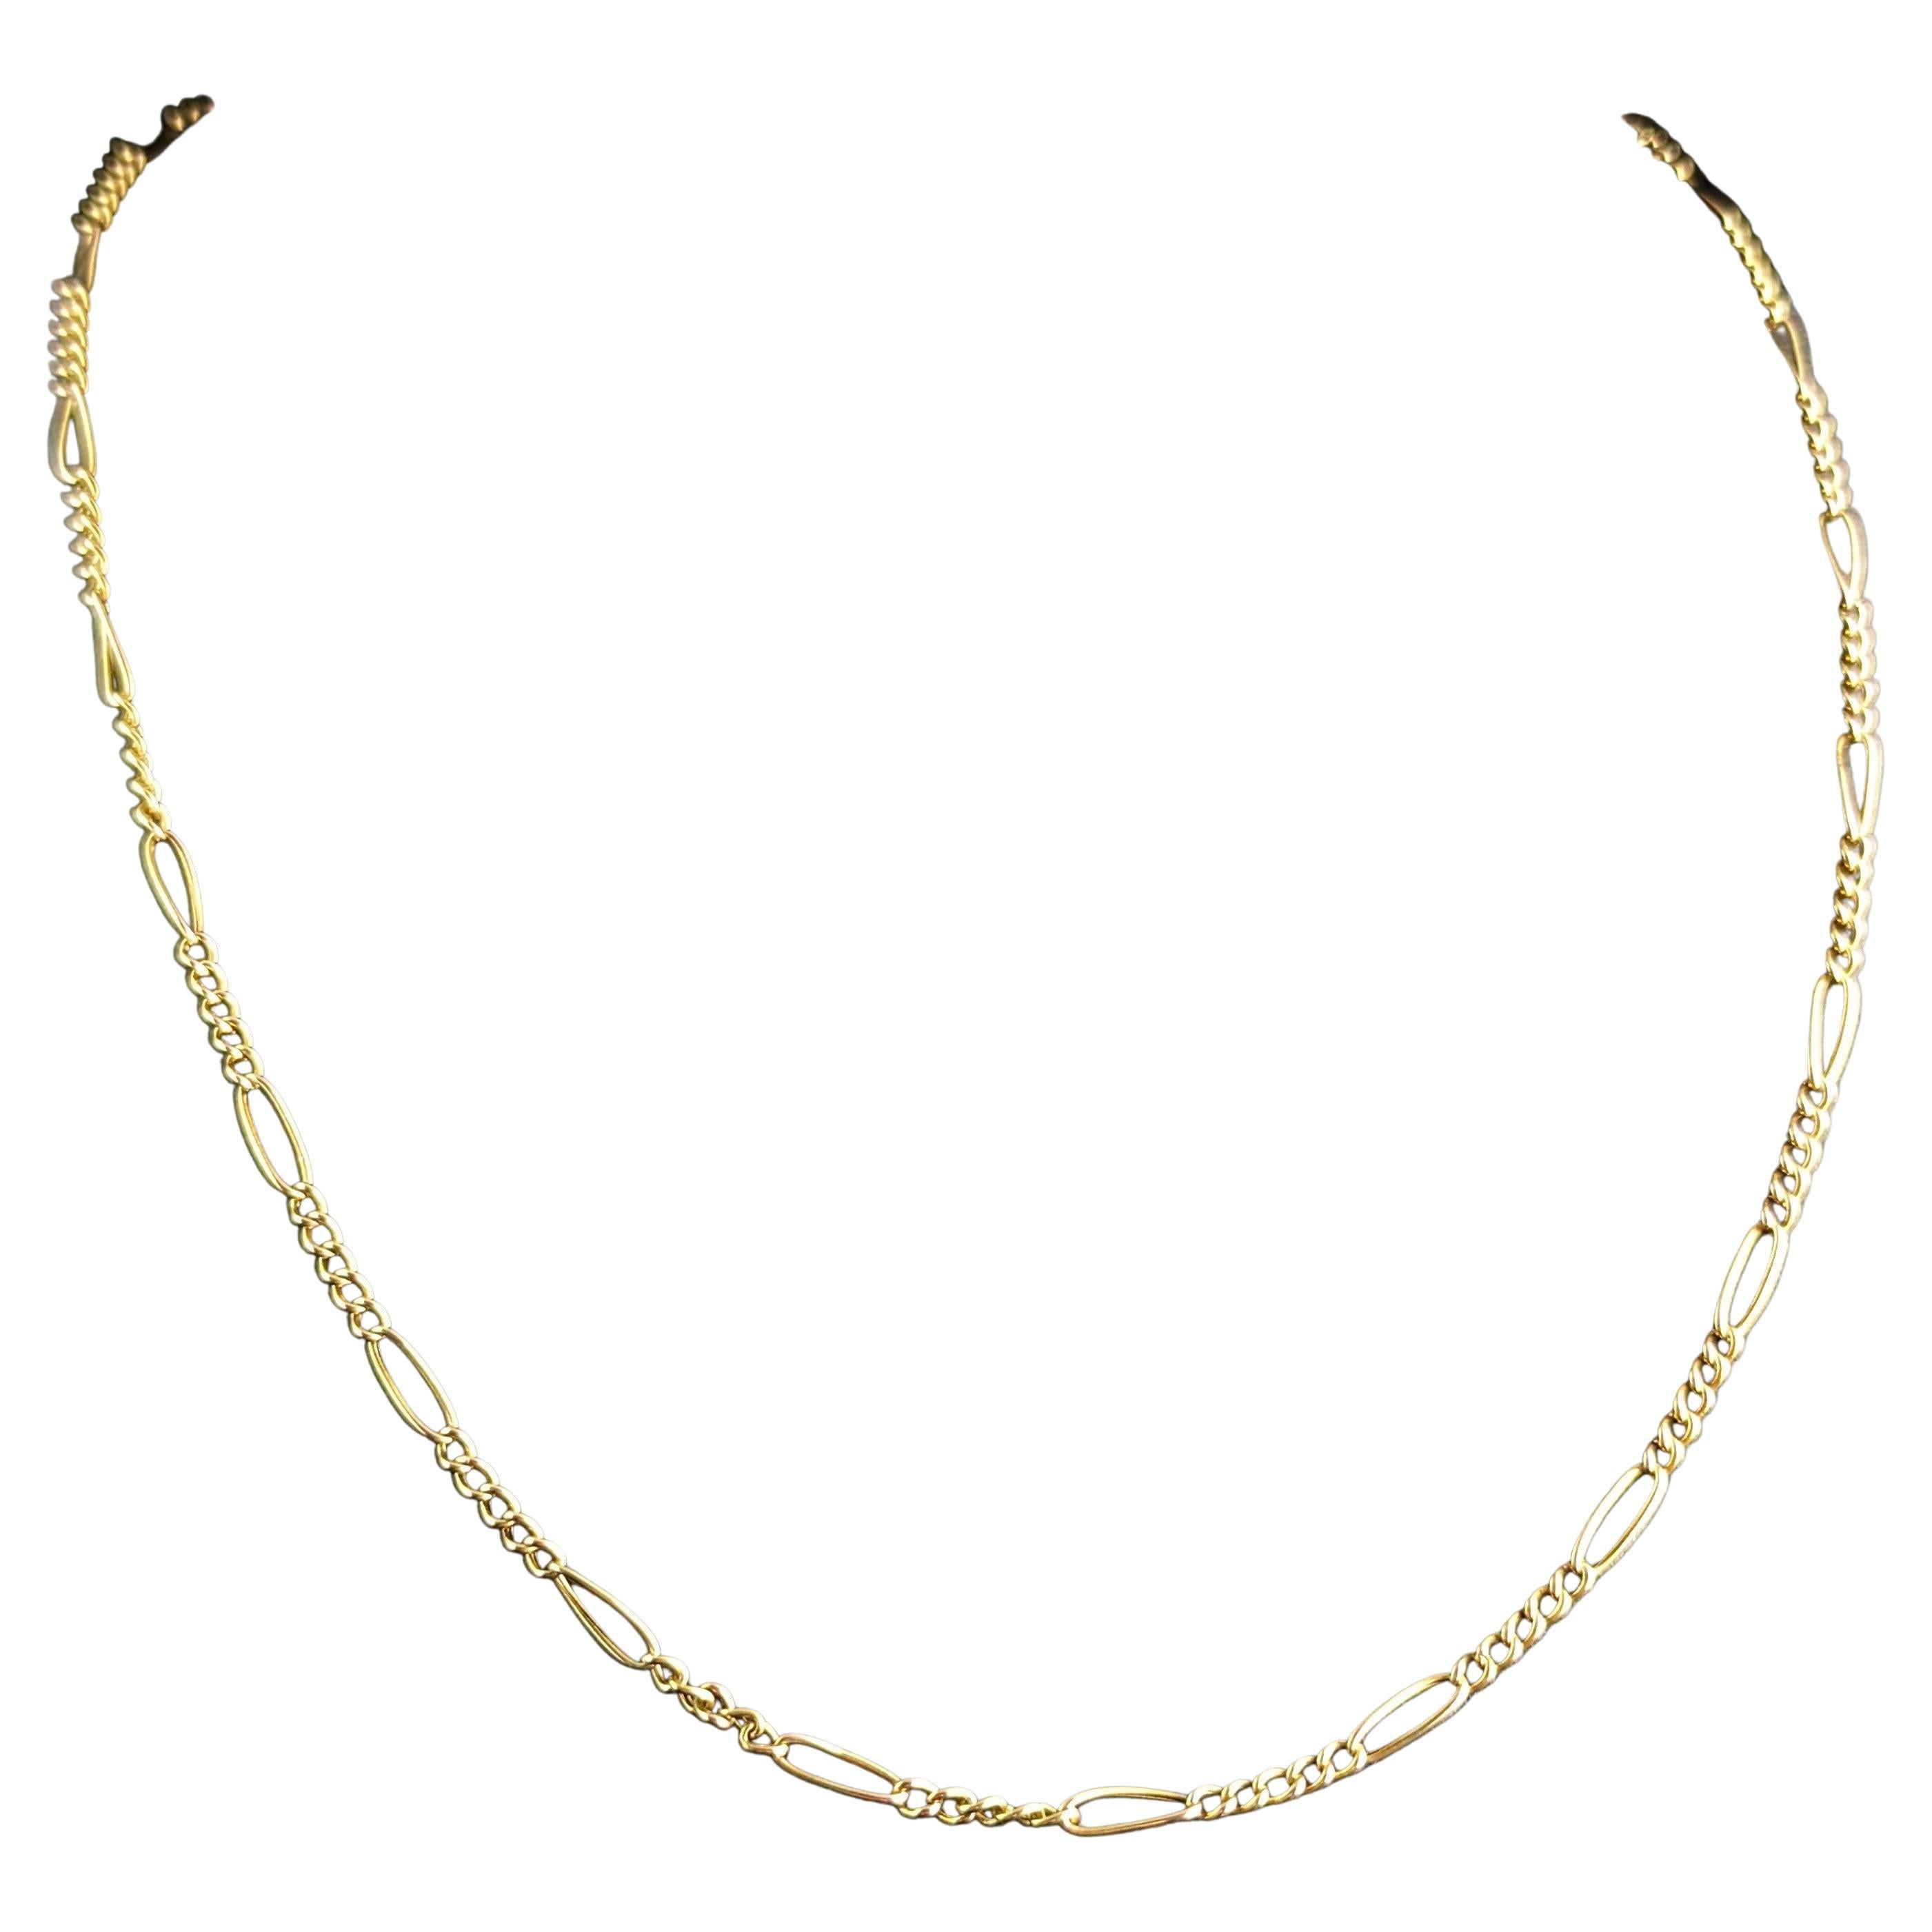 Antique 9k Yellow Gold Figaro Chain Necklace, Edwardian